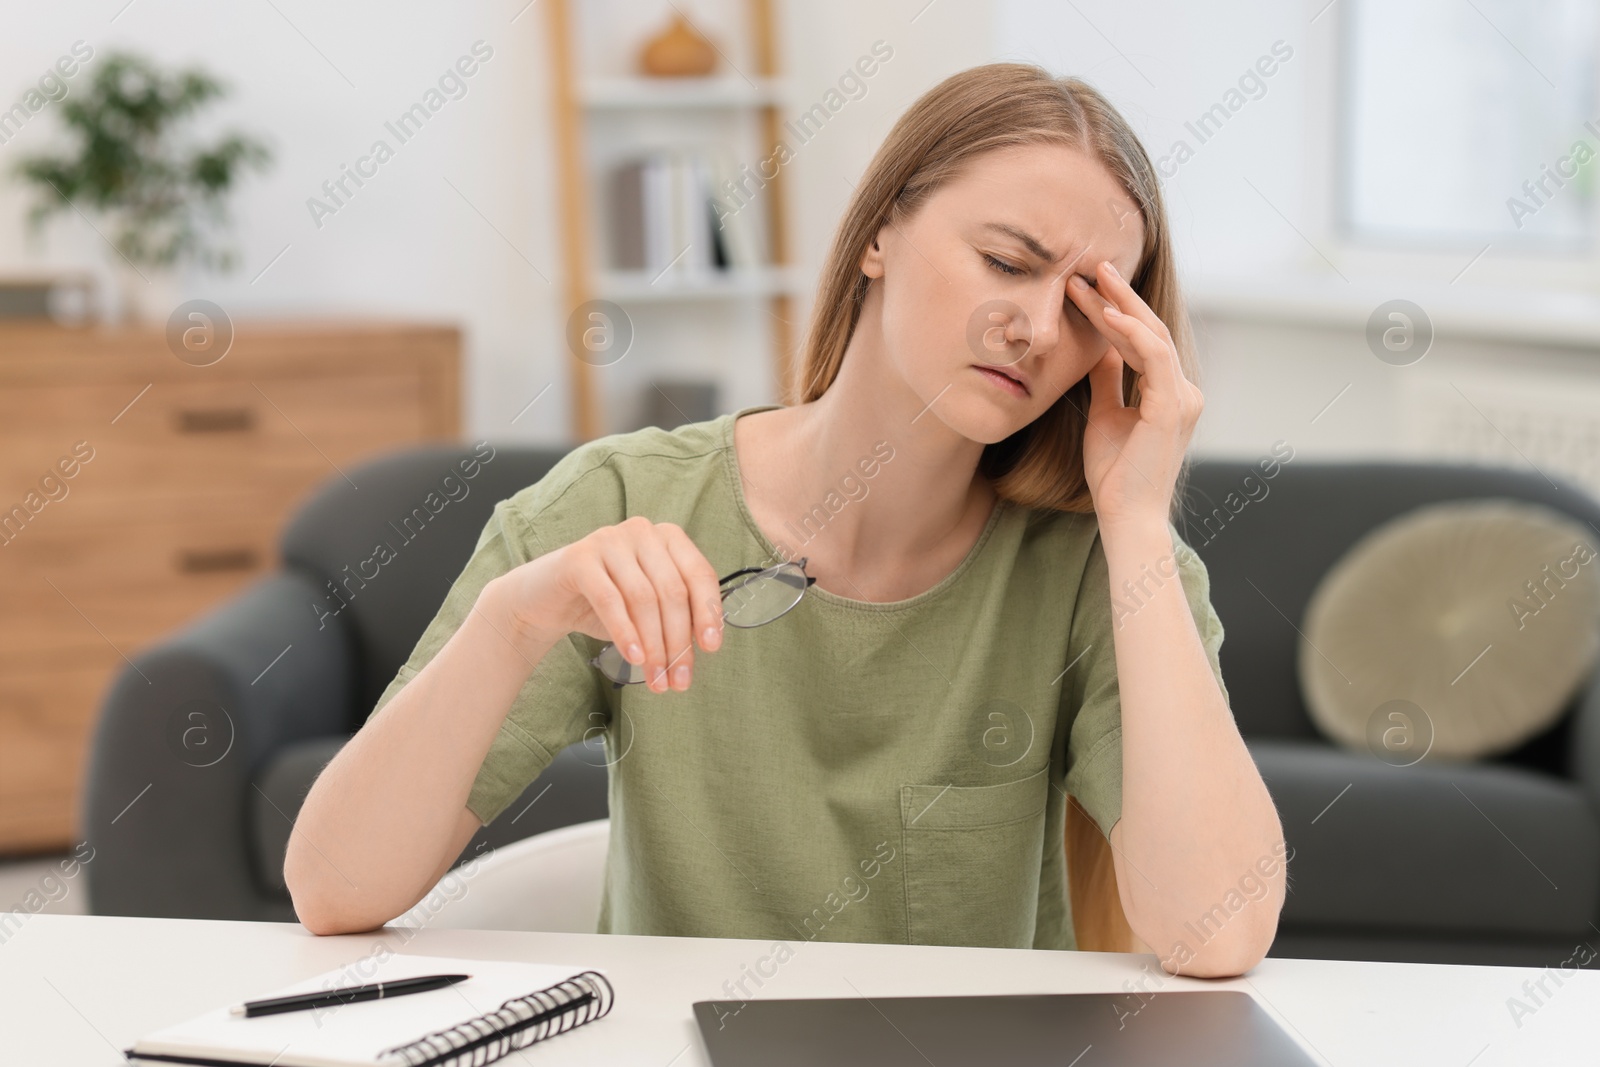 Photo of Overwhelmed young woman sitting with laptop at table in room